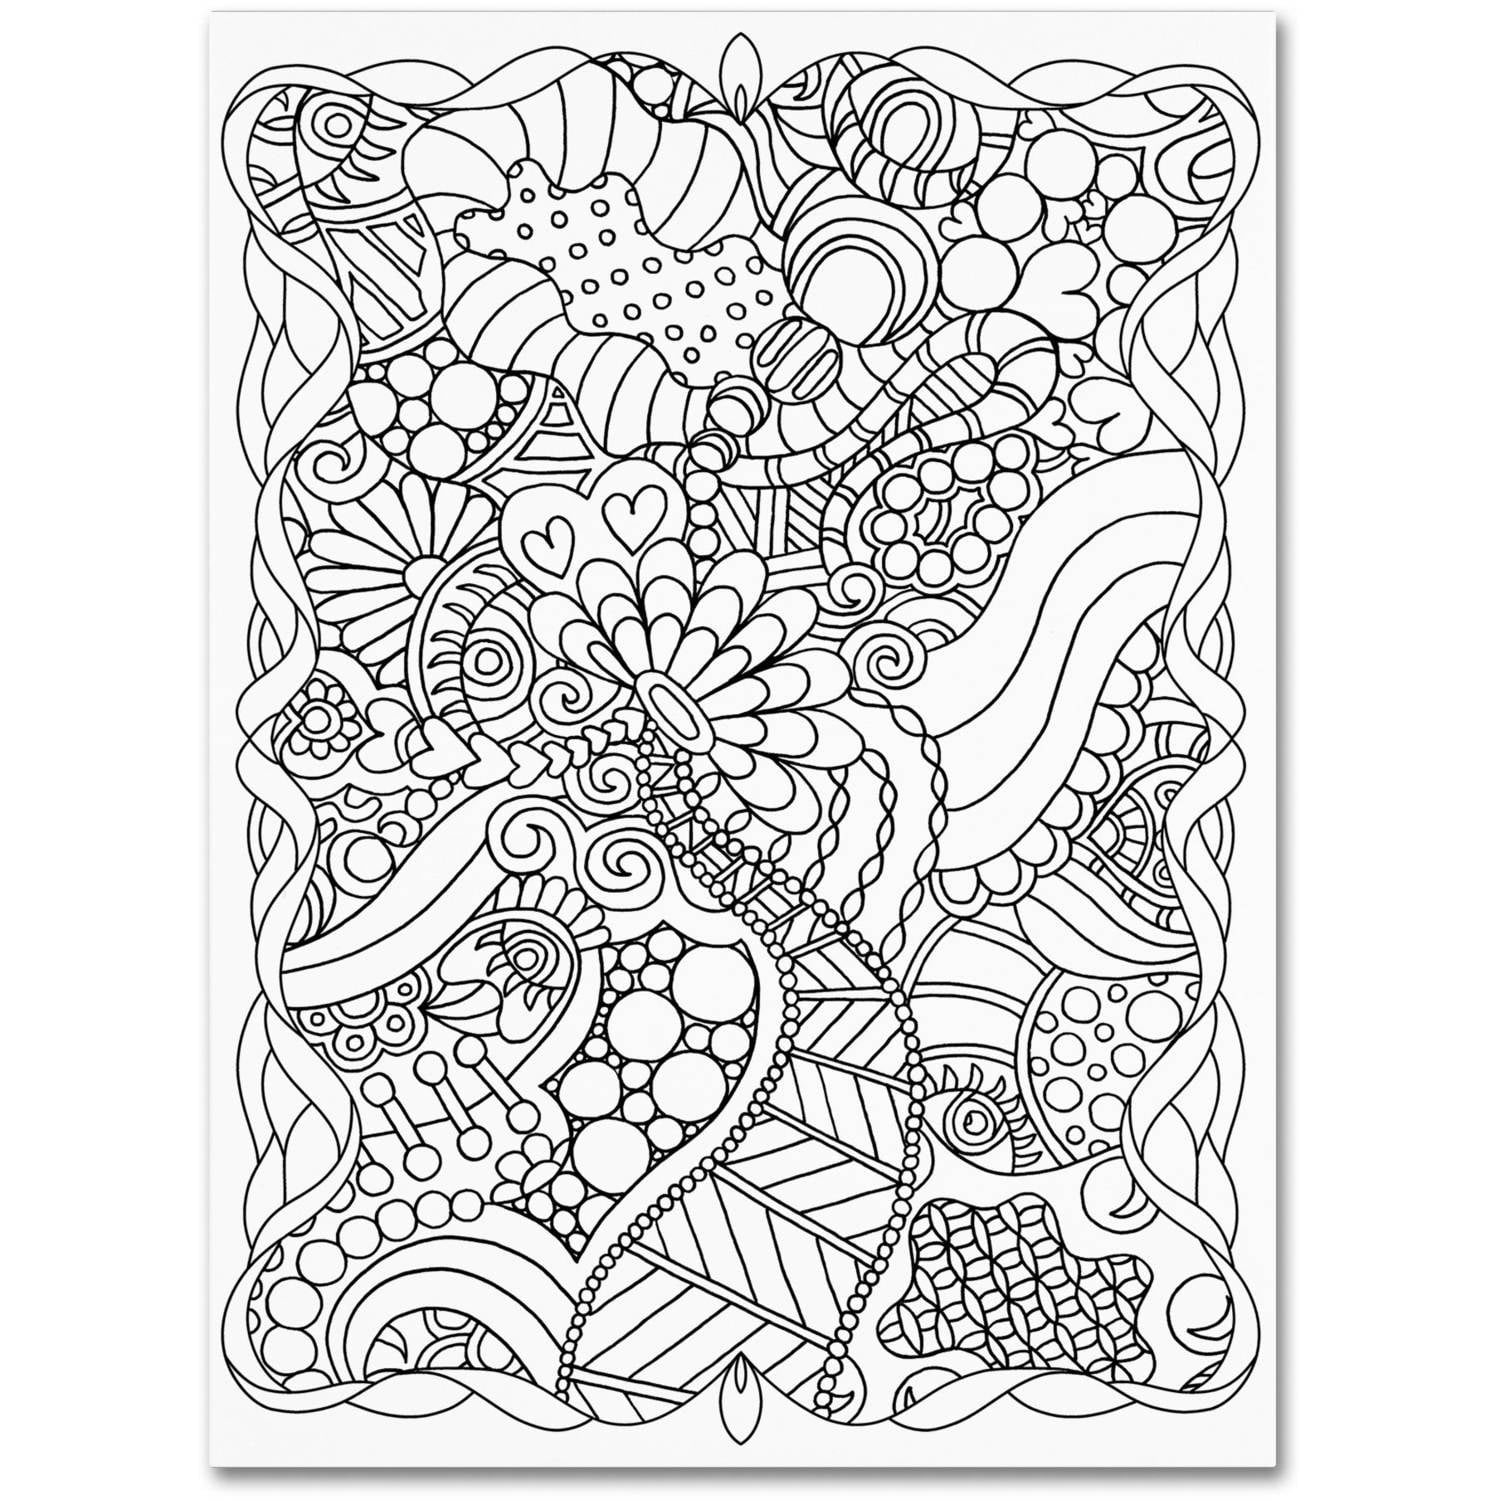 24 X 24 Large Coloring Poster Zentangle I 